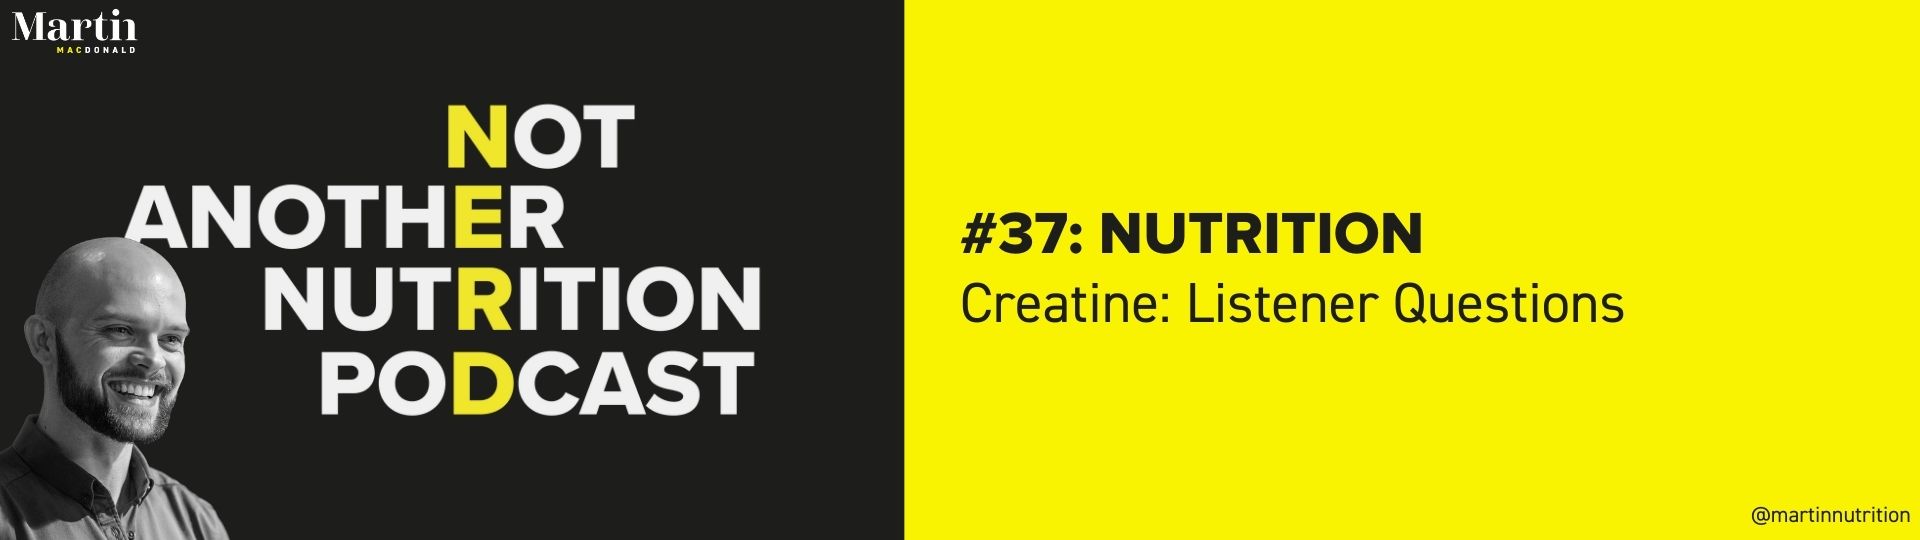 Creatine, The Missing Ingredient For Older People?